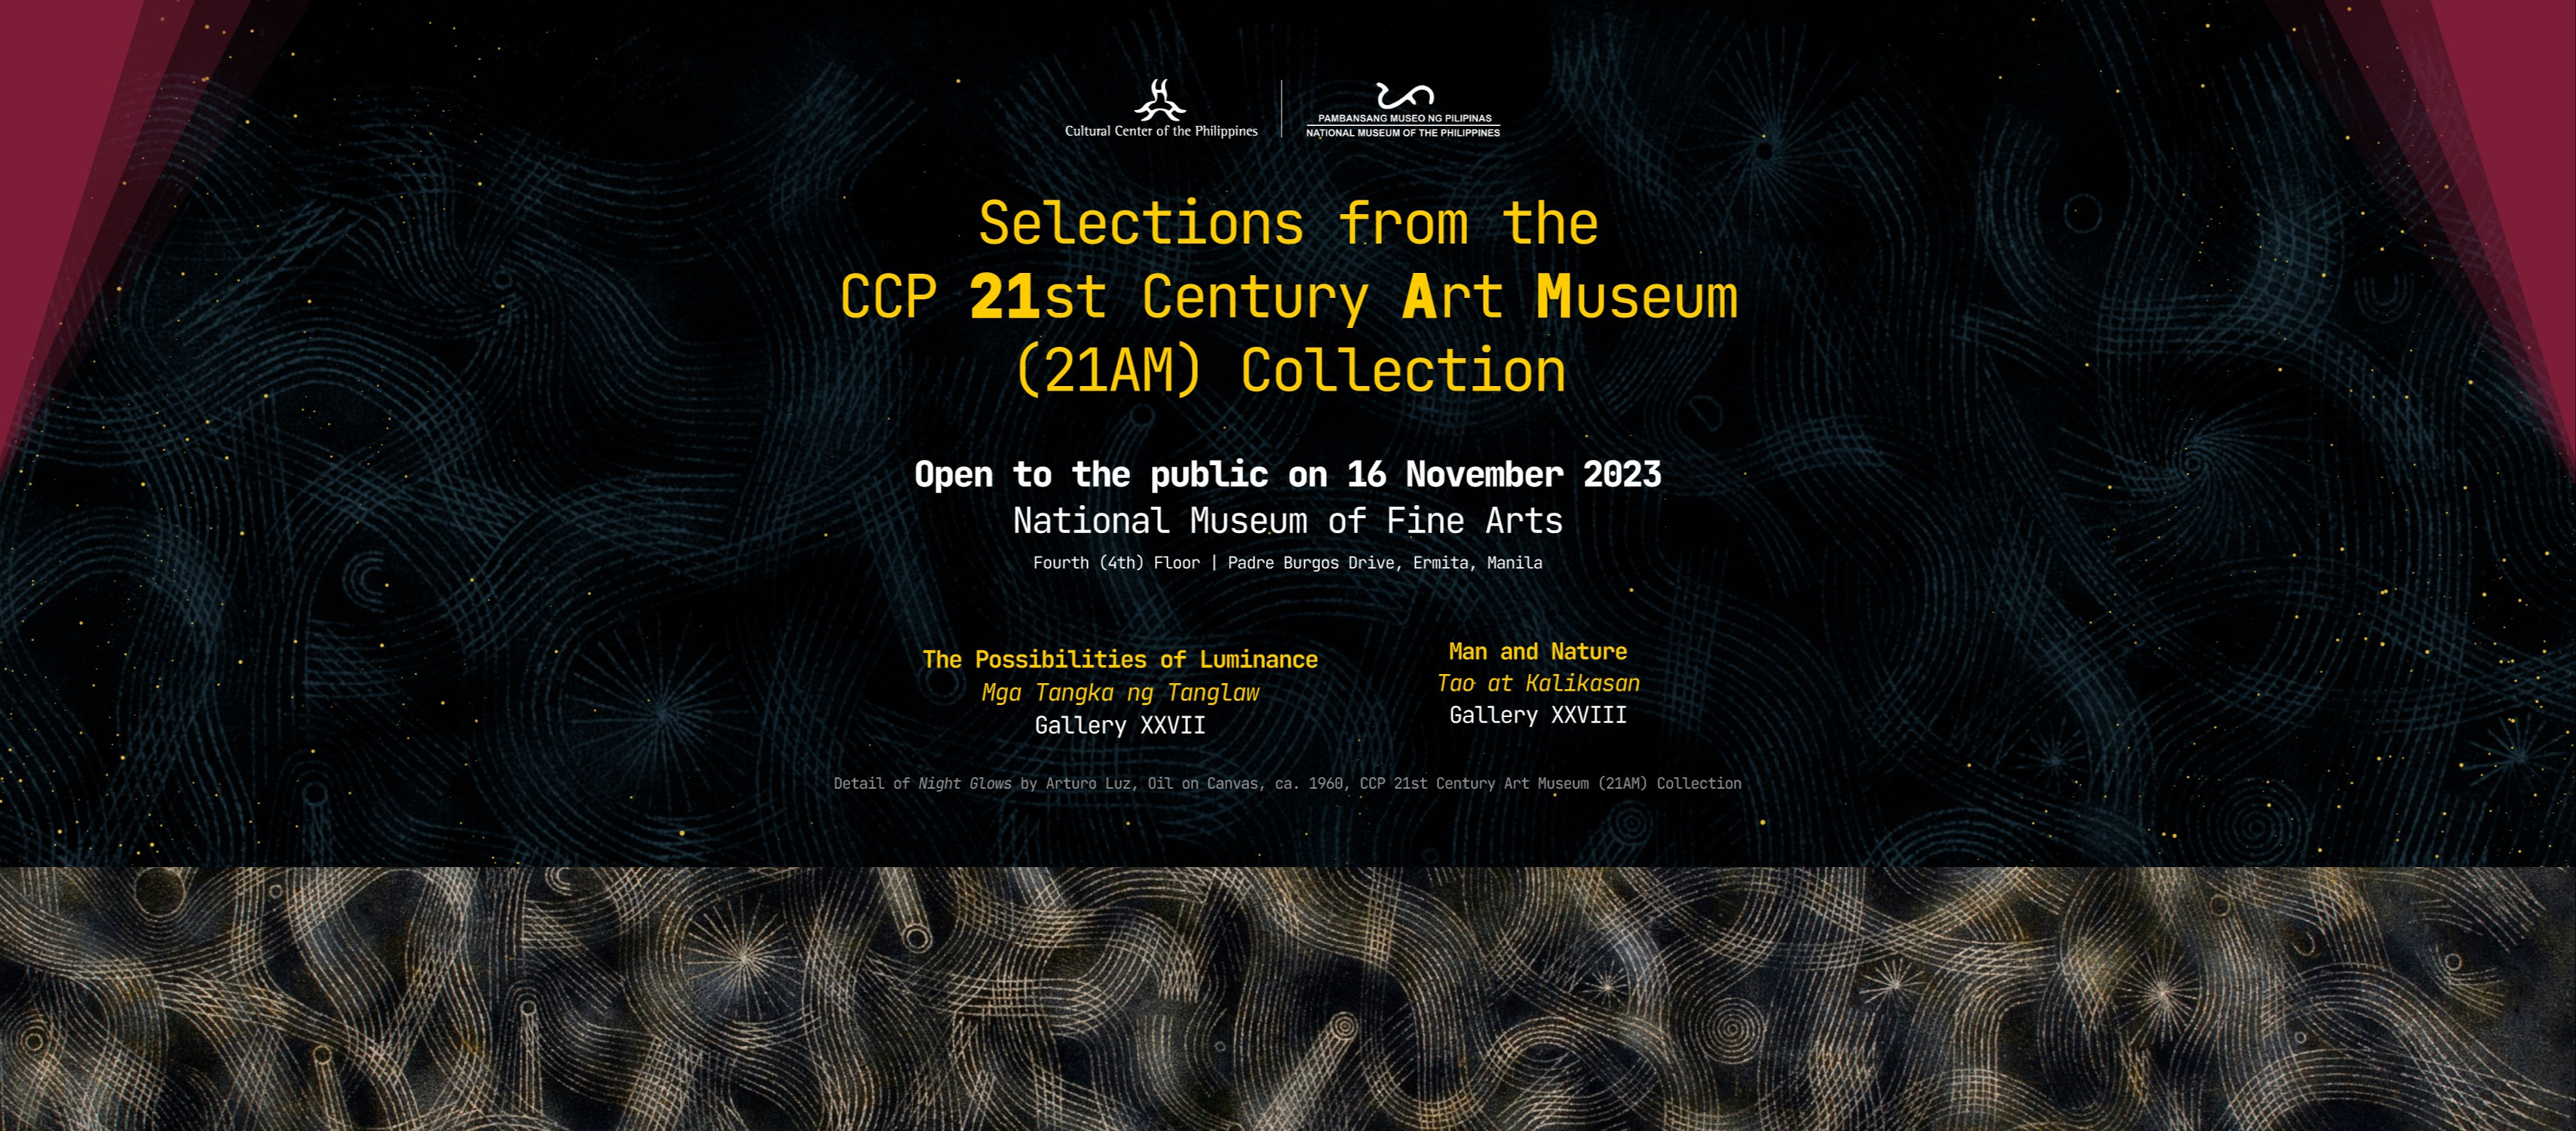 Selections from the 21st Century Art Museum (21AM) Collection